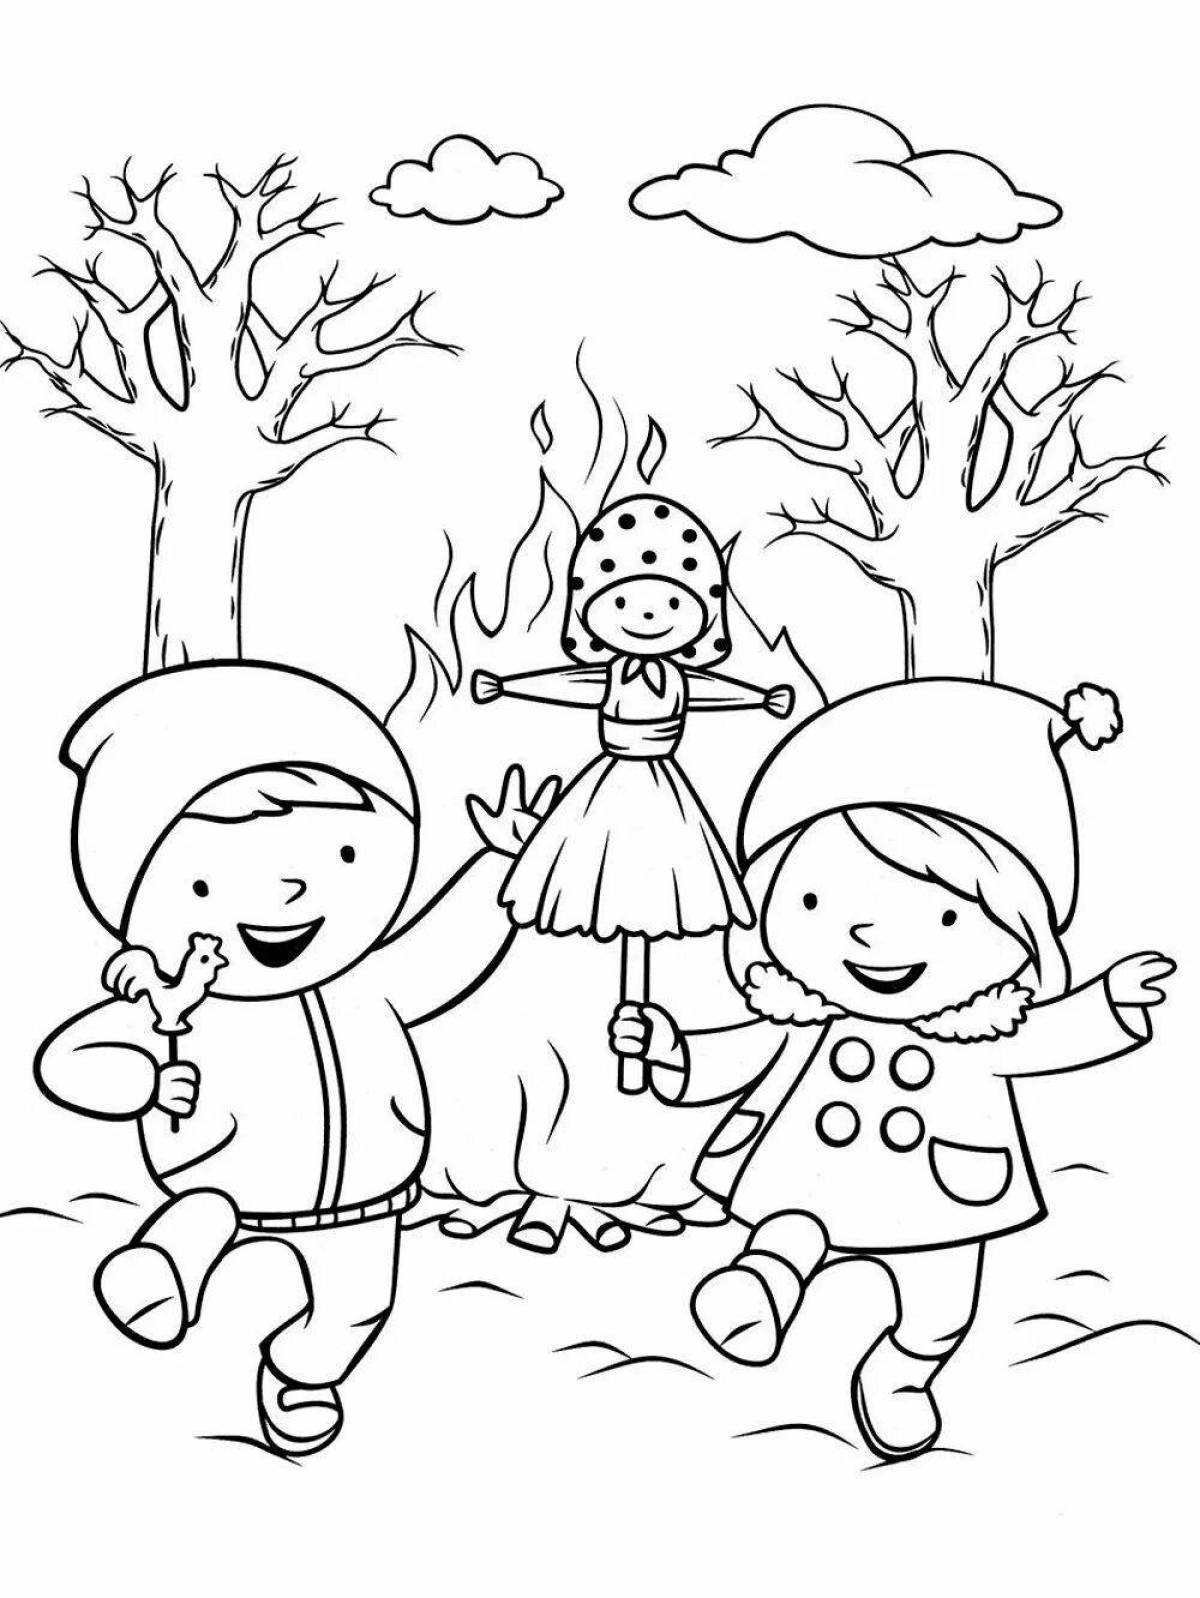 Colorful carnival coloring book